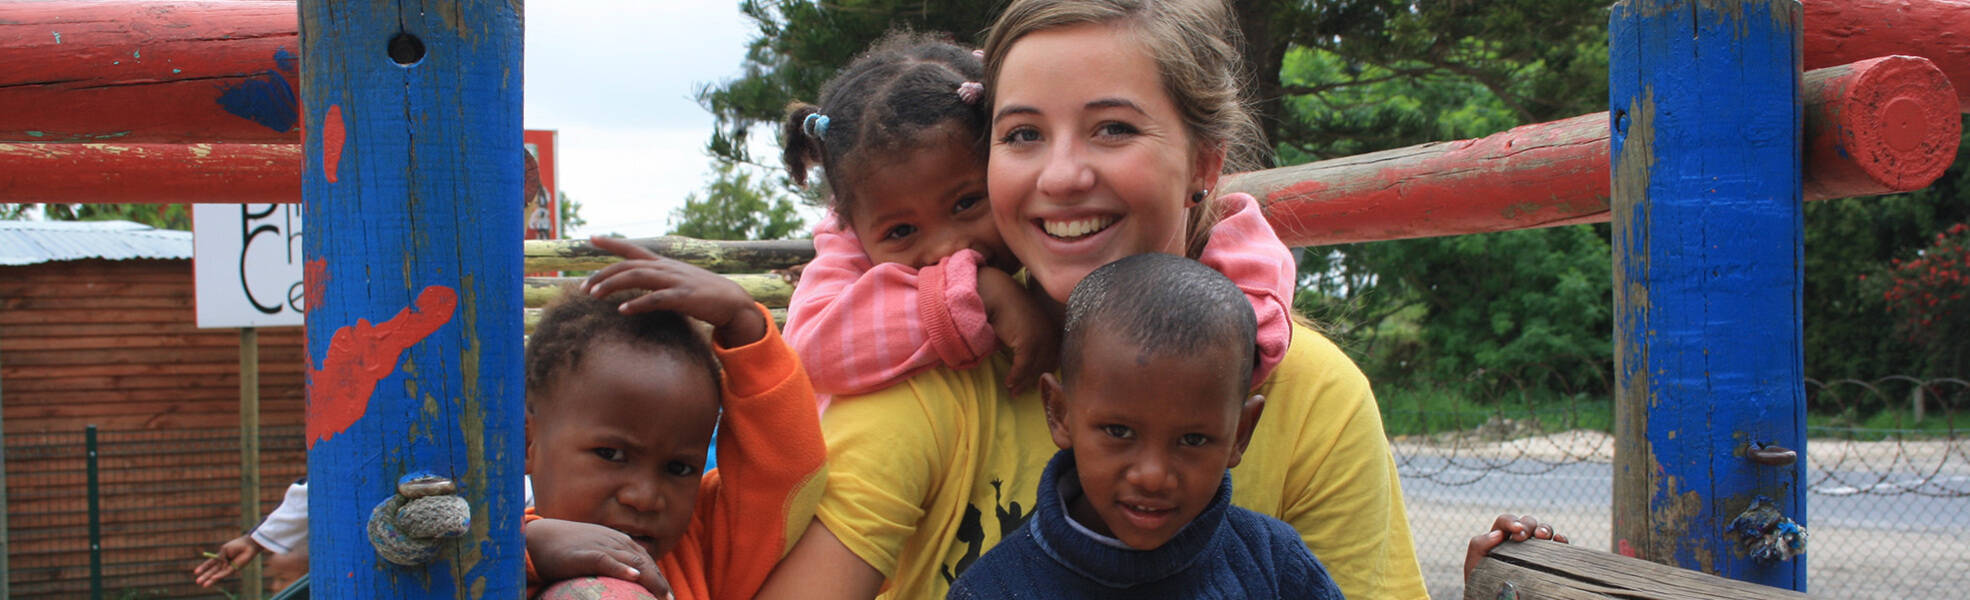 Volunteer with children during their social internship in South Africa